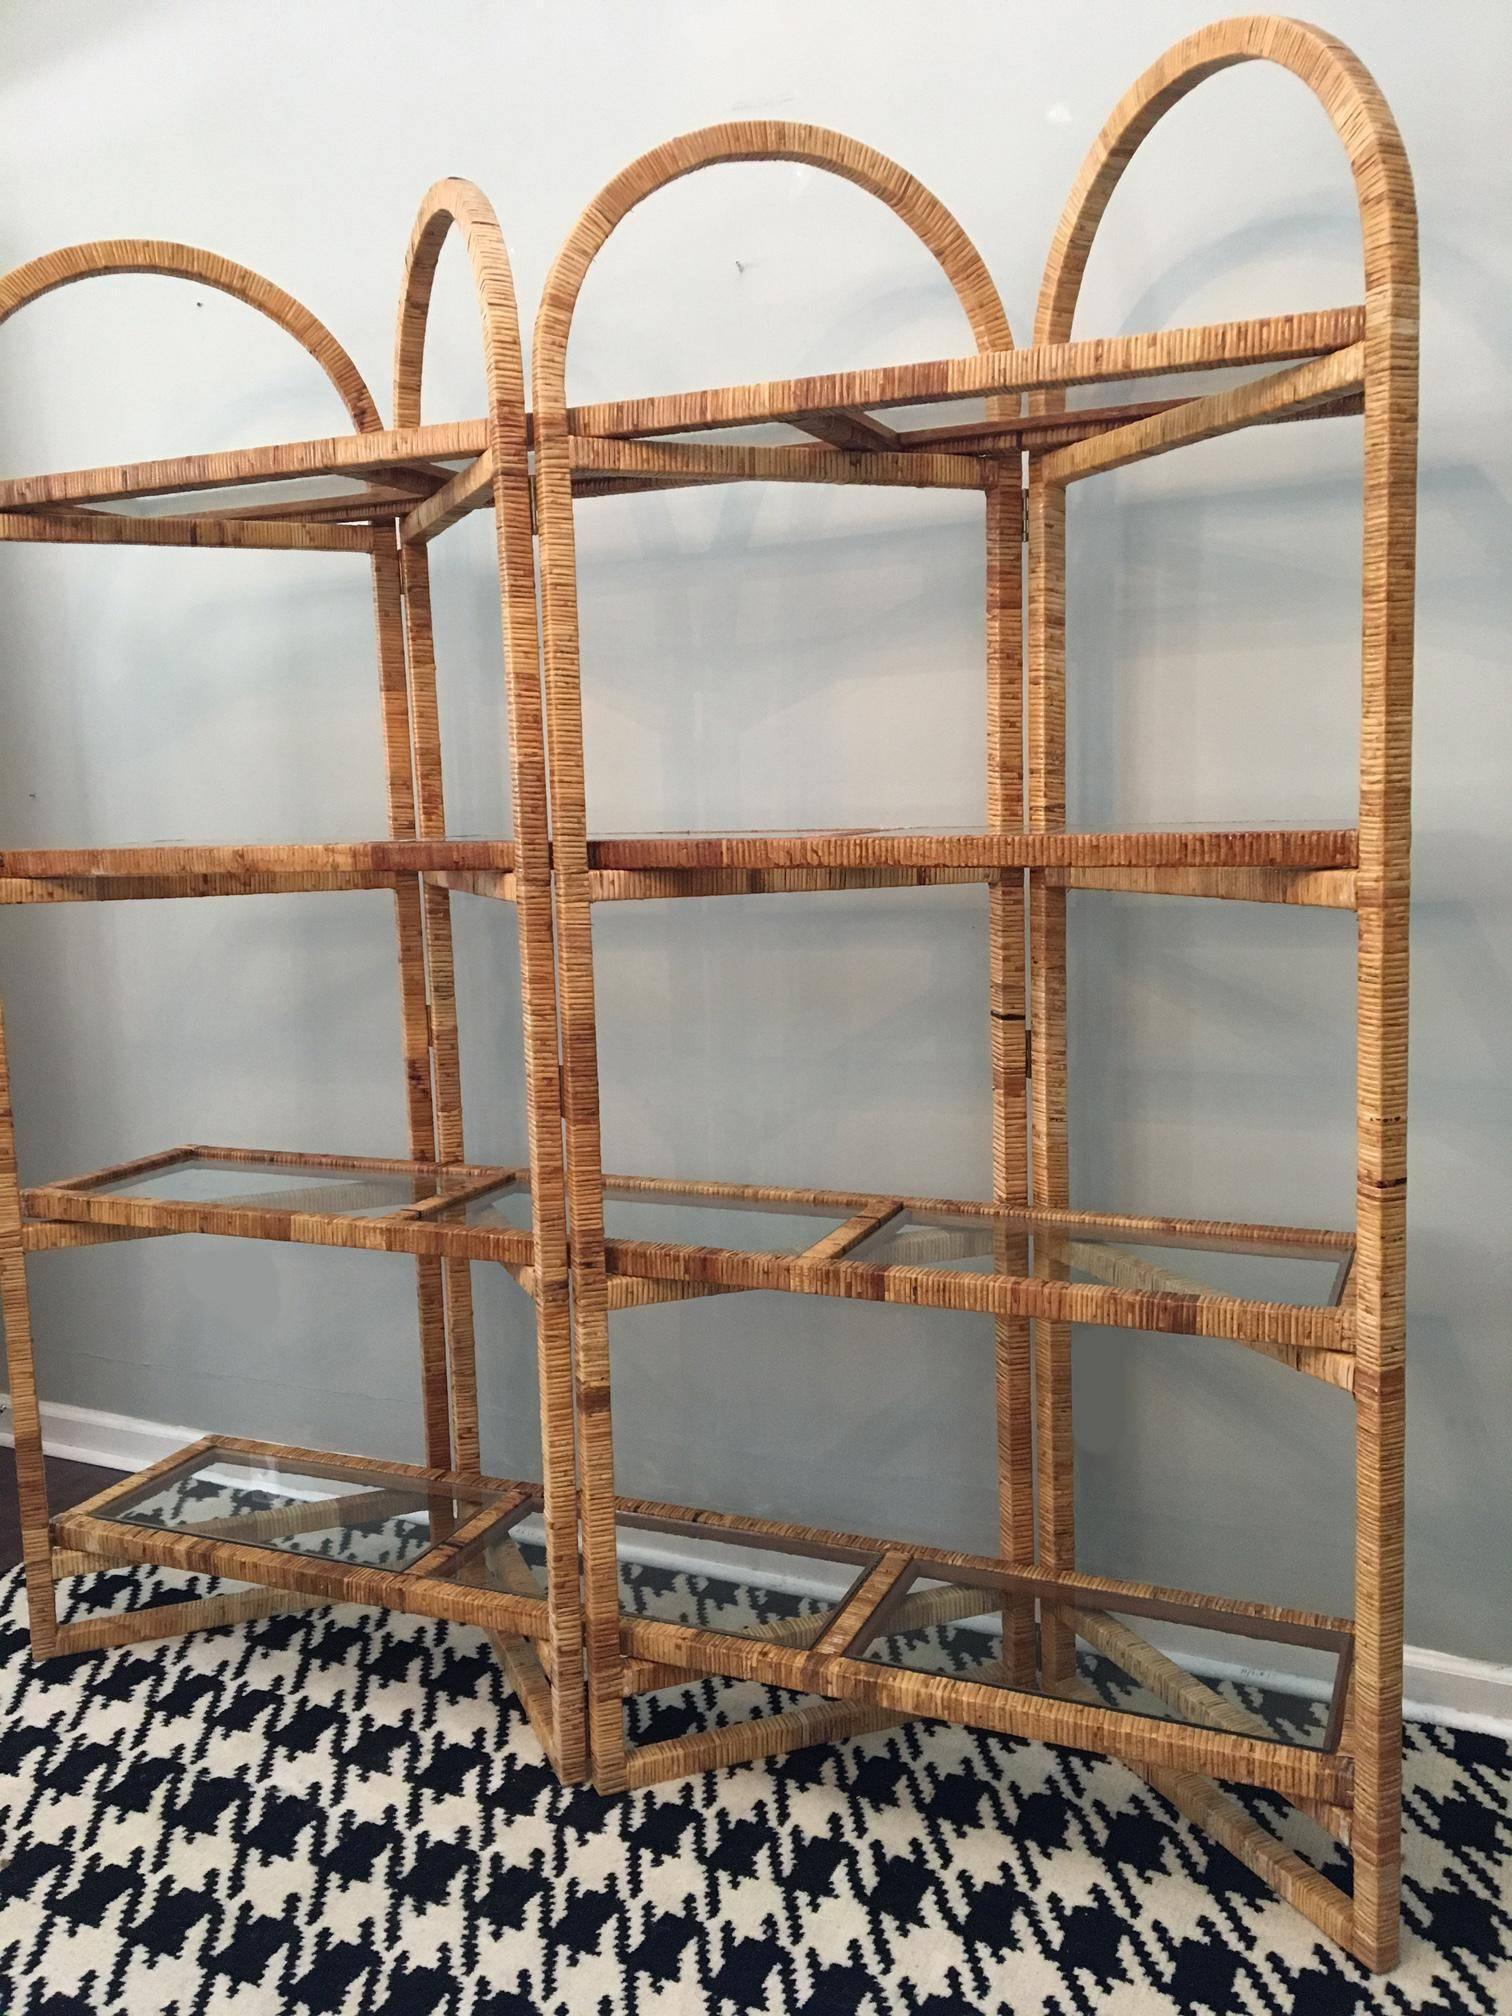 Palm Beach styling abounds with this large rattan étagère. Four panels unfold to support four shelves with glass inserts. Stands 78